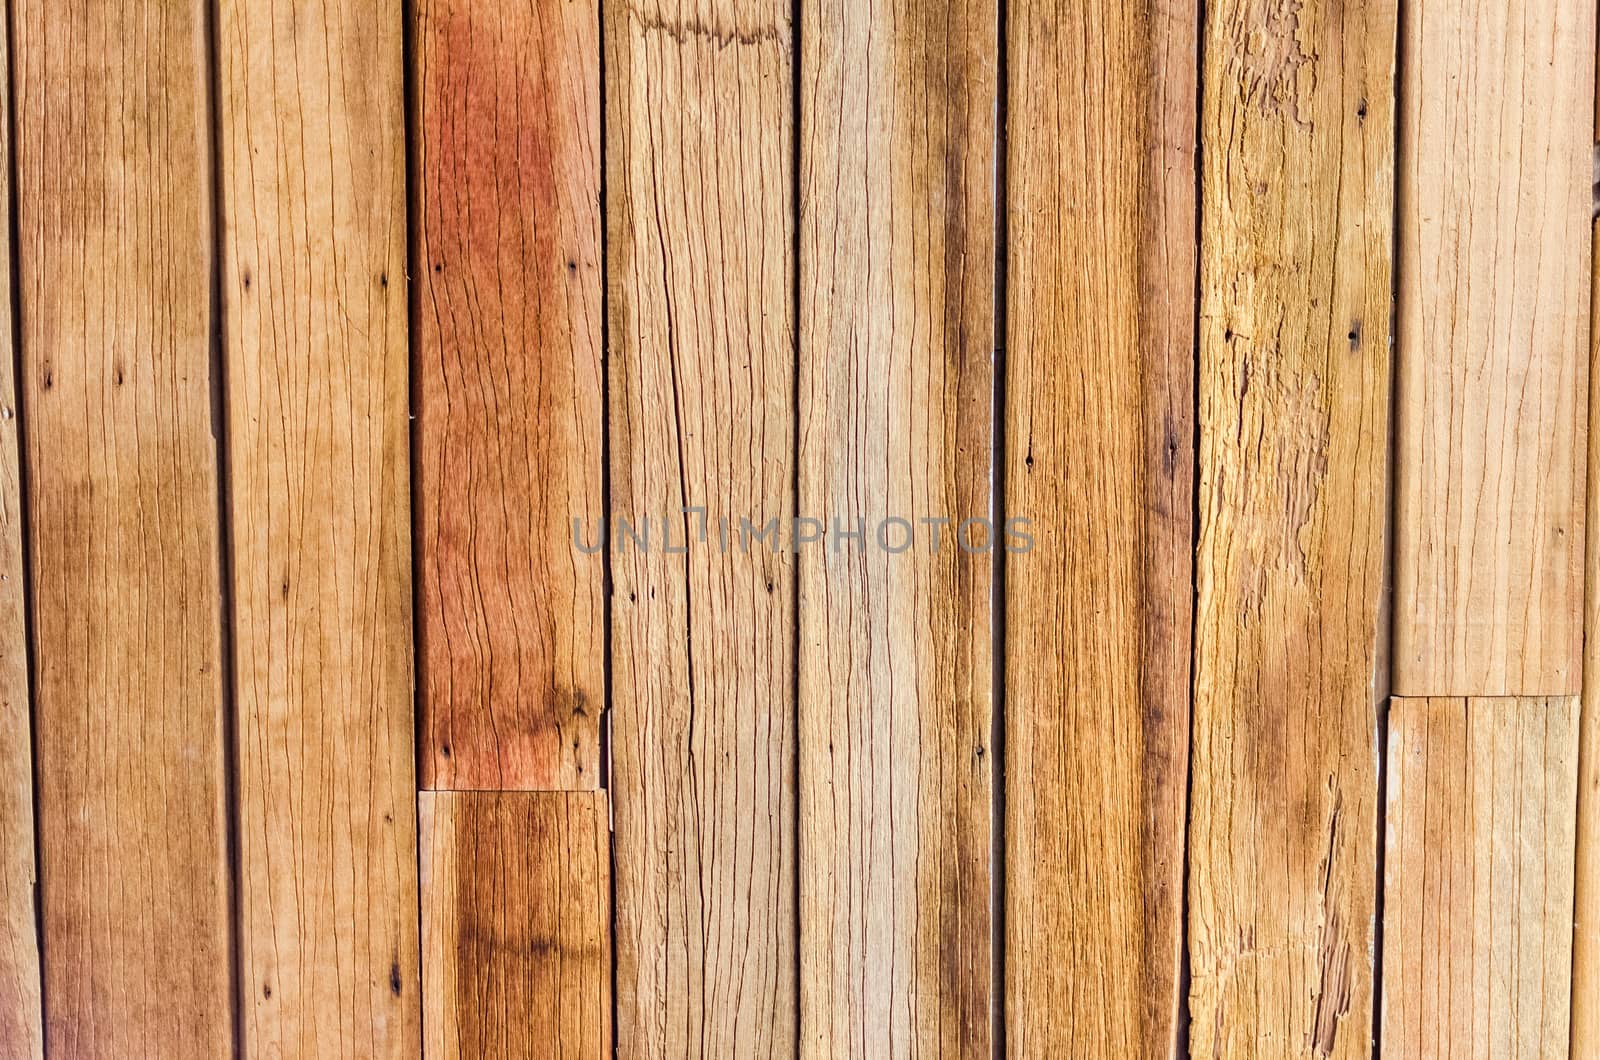 Wood background with knots and nail holes